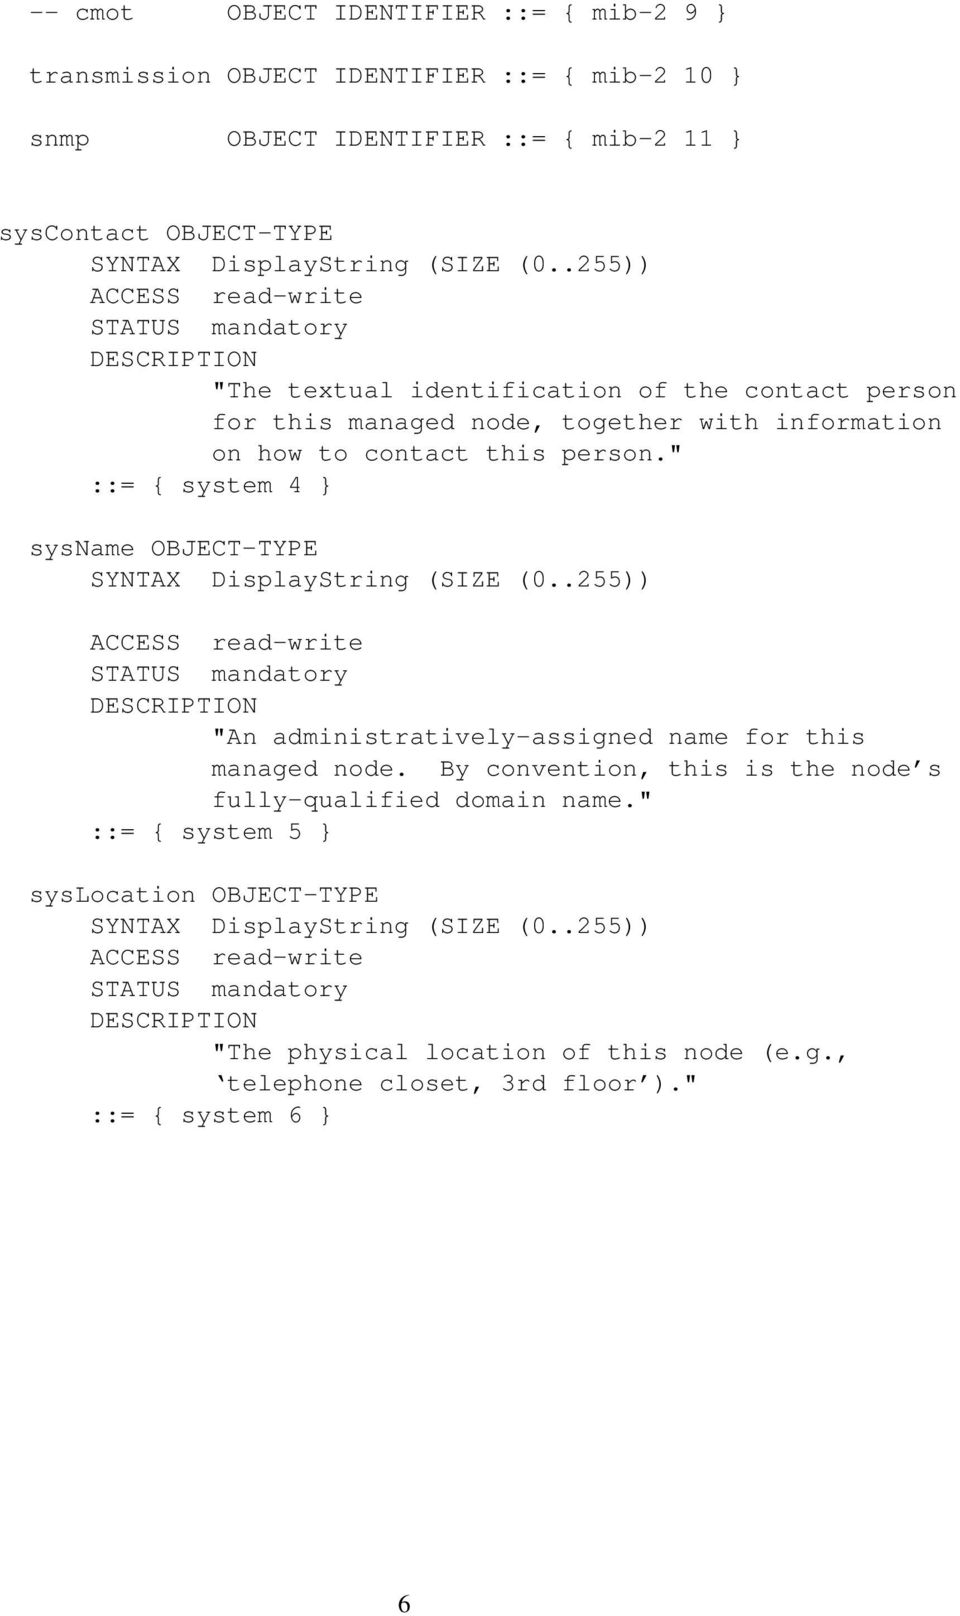 " ::= { system 4 } sysname OBJECT-TYPE SYNTAX DisplayString (SIZE (0..255)) ACCESS read-write STATUS mandatory DESCRIPTION "An administratively-assigned name for this managed node.